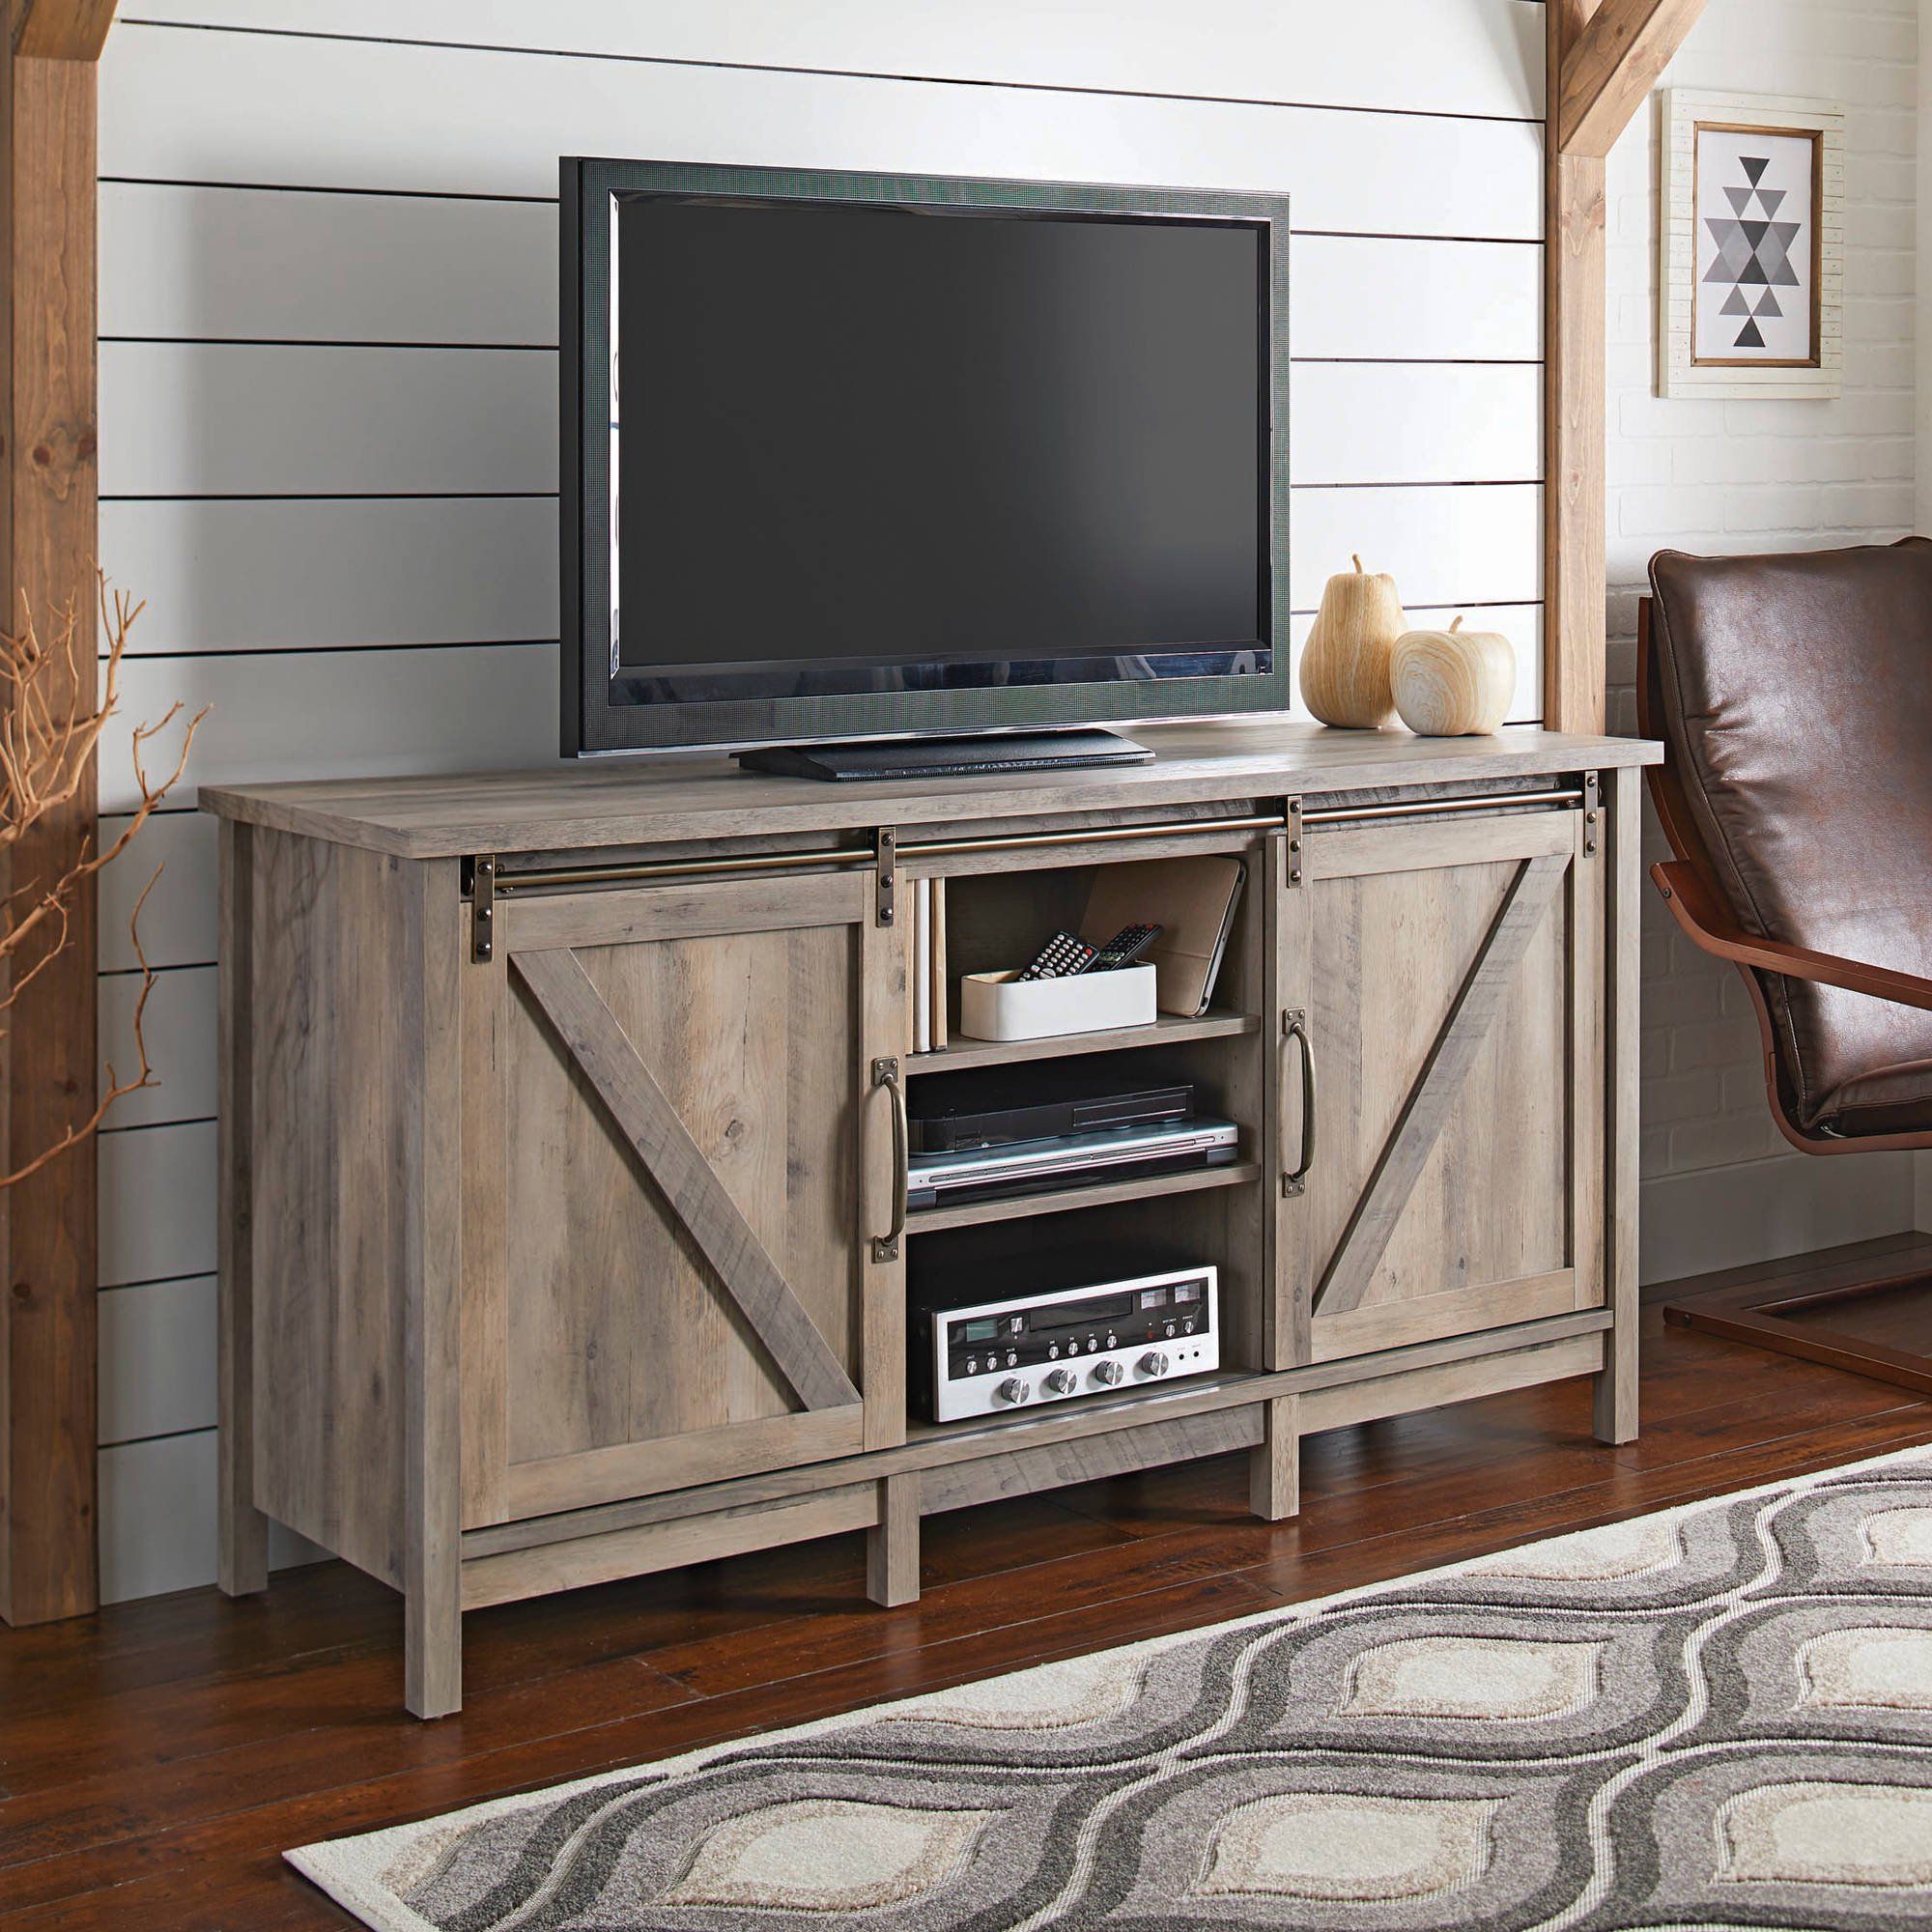 Most Recent Farmhouse Stand, Rustic Tv Stand, Modern Tv Stand, Modern Farmhouse In Modern Farmhouse Rustic Tv Stands (View 6 of 15)